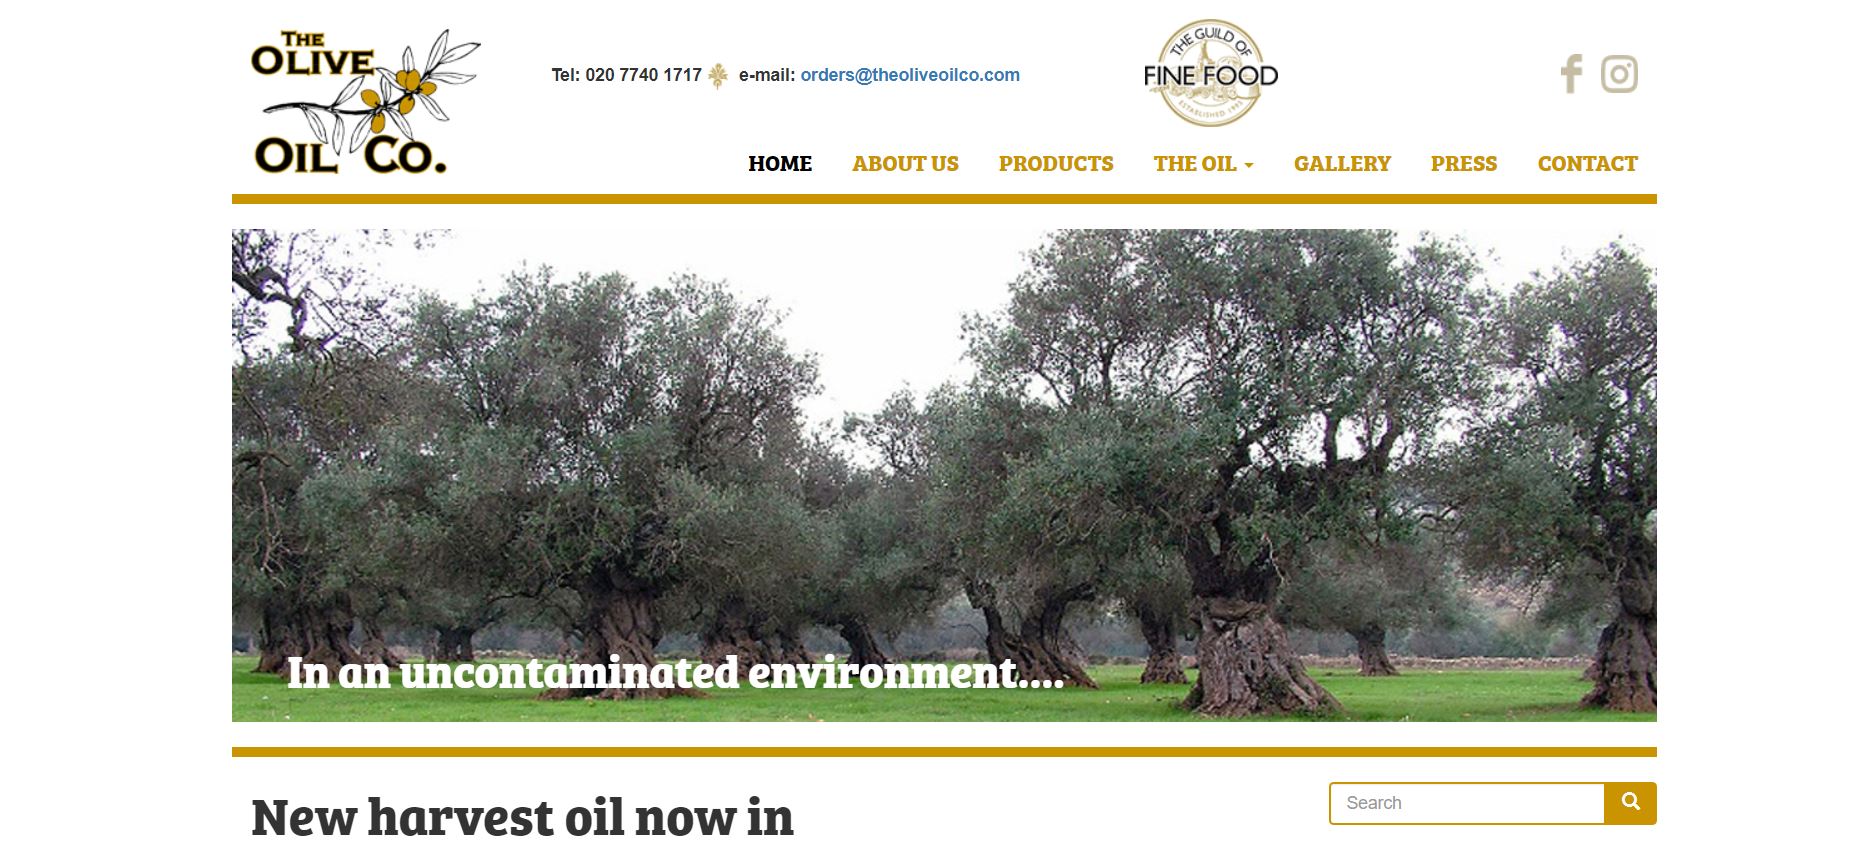 The olive oil co